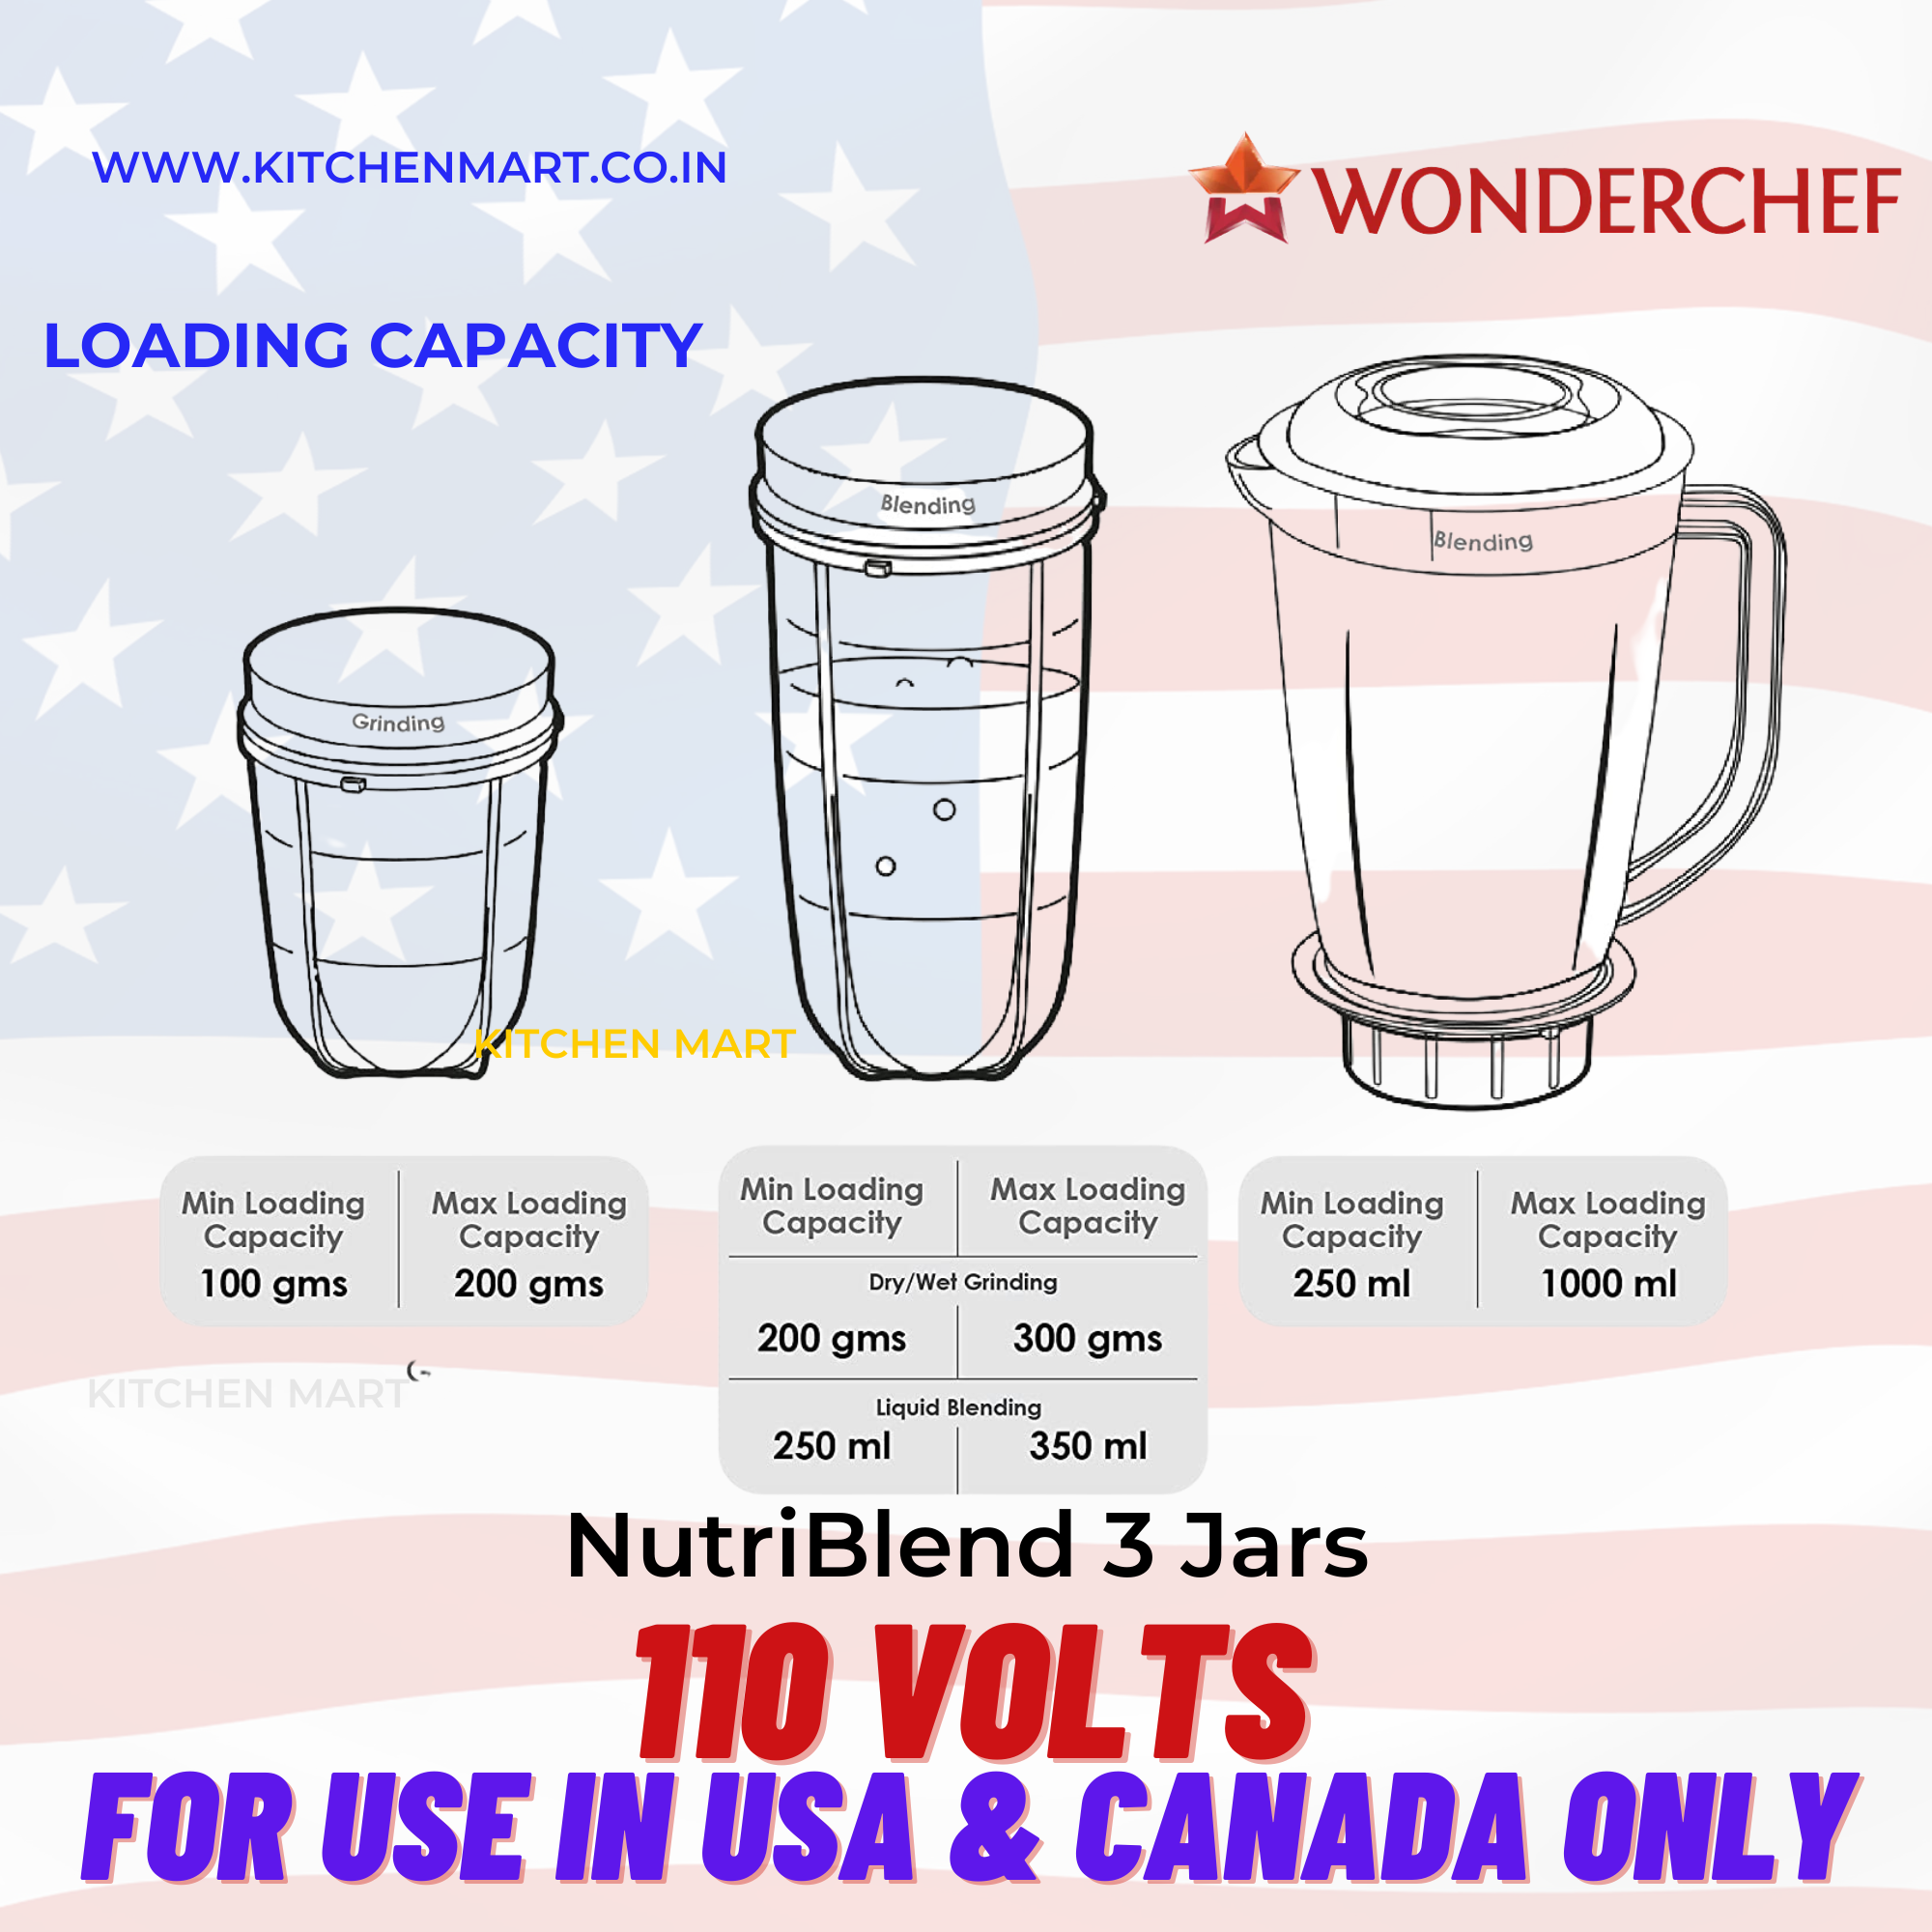 Wonderchef Nutri-blend Mixer, Grinder & Blender 300 Watts (110 Volts for use in USA and Canada only)